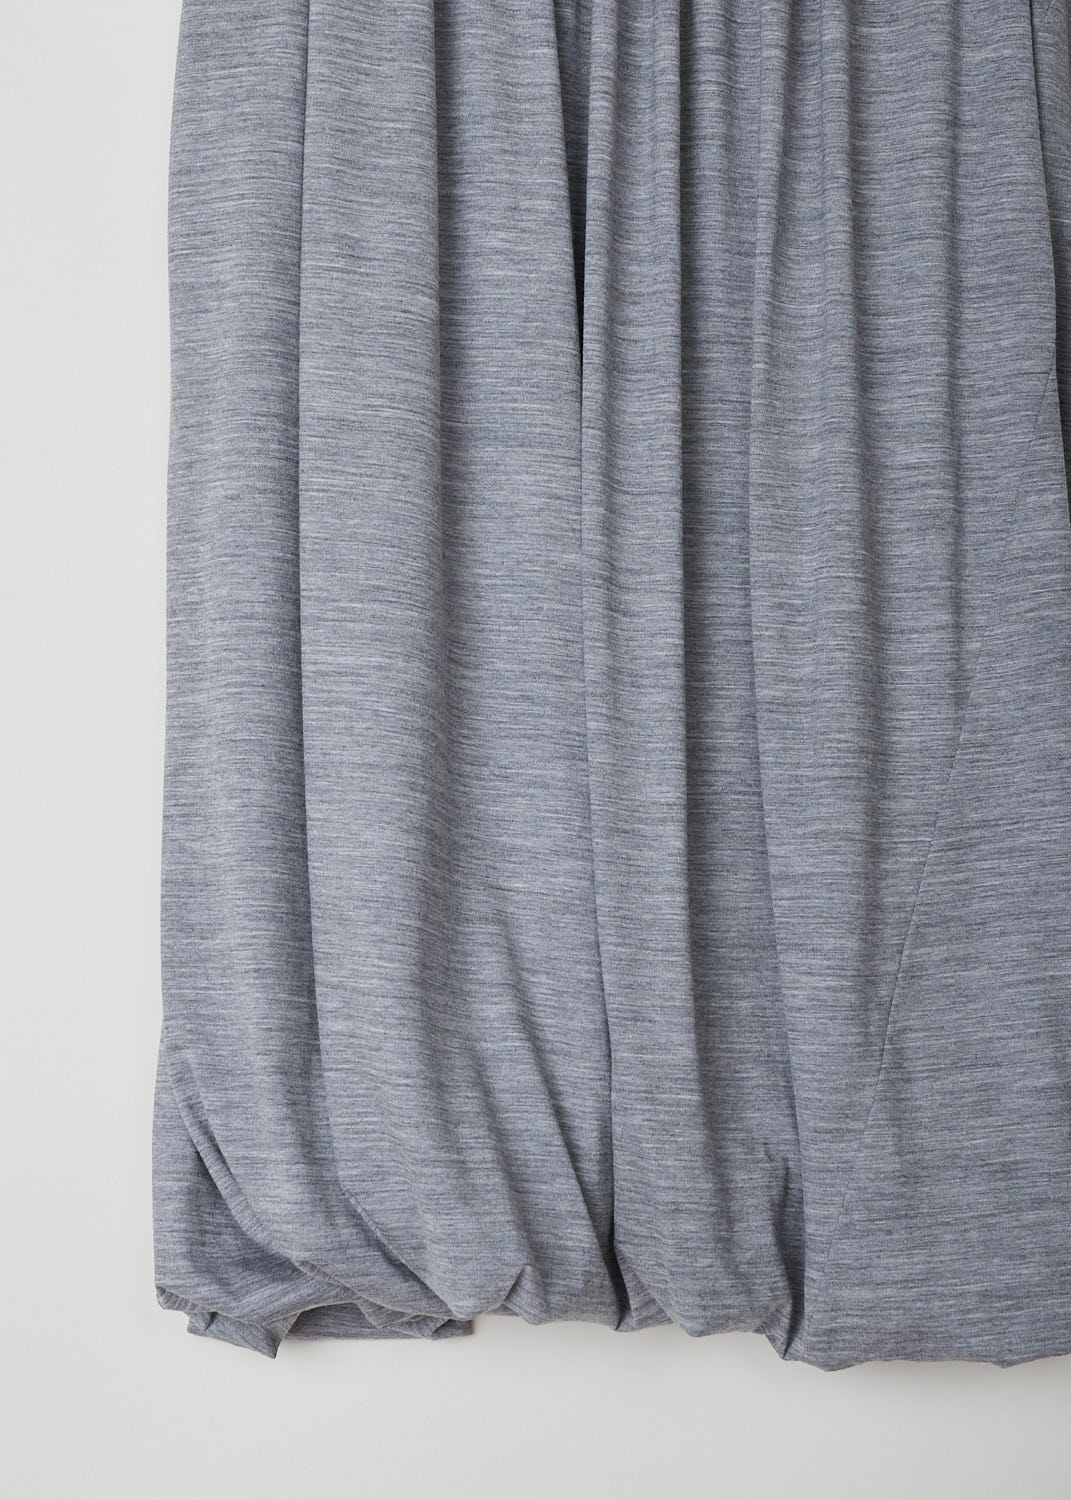 SOFIE Dâ€™HOORE, HEATHER GREY BALLOON SKIRT, SAOLA_WOJE_LIGHT_GREY_MELA, Grey, Detail, This twisted balloon skirt in heather grey features a concealed side zip. A single side pocket can be found concealed in the seam.
